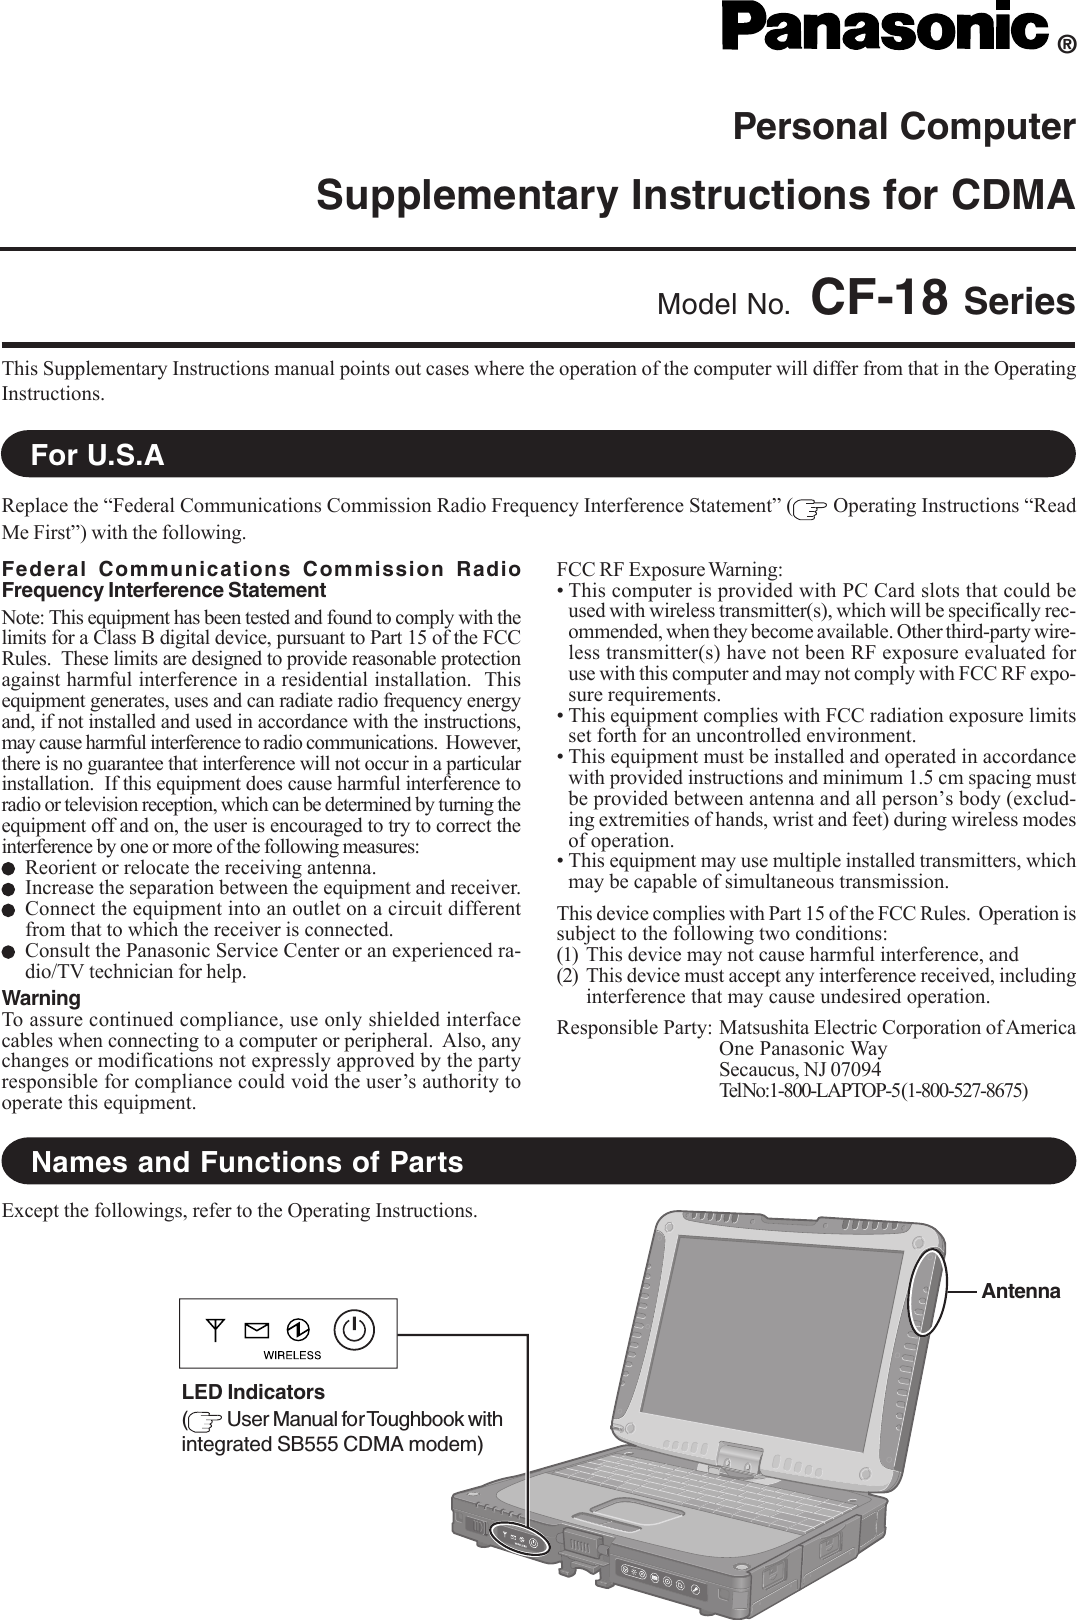 Personal ComputerSupplementary Instructions for CDMAThis Supplementary Instructions manual points out cases where the operation of the computer will differ from that in the OperatingInstructions.®Model No. CF-18 SeriesReplace the “Federal Communications Commission Radio Frequency Interference Statement” (  Operating Instructions “ReadMe First”) with the following.For U.S.ANames and Functions of PartsFederal Communications Commission RadioFrequency Interference StatementNote: This equipment has been tested and found to comply with thelimits for a Class B digital device, pursuant to Part 15 of the FCCRules.  These limits are designed to provide reasonable protectionagainst harmful interference in a residential installation.  Thisequipment generates, uses and can radiate radio frequency energyand, if not installed and used in accordance with the instructions,may cause harmful interference to radio communications.  However,there is no guarantee that interference will not occur in a particularinstallation.  If this equipment does cause harmful interference toradio or television reception, which can be determined by turning theequipment off and on, the user is encouraged to try to correct theinterference by one or more of the following measures:Reorient or relocate the receiving antenna.Increase the separation between the equipment and receiver.Connect the equipment into an outlet on a circuit differentfrom that to which the receiver is connected.Consult the Panasonic Service Center or an experienced ra-dio/TV technician for help.WarningTo assure continued compliance, use only shielded interfacecables when connecting to a computer or peripheral.  Also, anychanges or modifications not expressly approved by the partyresponsible for compliance could void the user’s authority tooperate this equipment.FCC RF Exposure Warning:• This computer is provided with PC Card slots that could beused with wireless transmitter(s), which will be specifically rec-ommended, when they become available. Other third-party wire-less transmitter(s) have not been RF exposure evaluated foruse with this computer and may not comply with FCC RF expo-sure requirements.• This equipment complies with FCC radiation exposure limitsset forth for an uncontrolled environment.• This equipment must be installed and operated in accordancewith provided instructions and minimum 1.5 cm spacing mustbe provided between antenna and all person’s body (exclud-ing extremities of hands, wrist and feet) during wireless modesof operation.• This equipment may use multiple installed transmitters, whichmay be capable of simultaneous transmission.This device complies with Part 15 of the FCC Rules.  Operation issubject to the following two conditions:(1) This device may not cause harmful interference, and(2) This device must accept any interference received, includinginterference that may cause undesired operation.Responsible Party: Matsushita Electric Corporation of AmericaOne Panasonic WaySecaucus, NJ 07094Tel No:1-800-LAPTOP-5 (1-800-527-8675)Except the followings, refer to the Operating Instructions.AntennaLED Indicators( User Manual for Toughbook withintegrated SB555 CDMA modem)